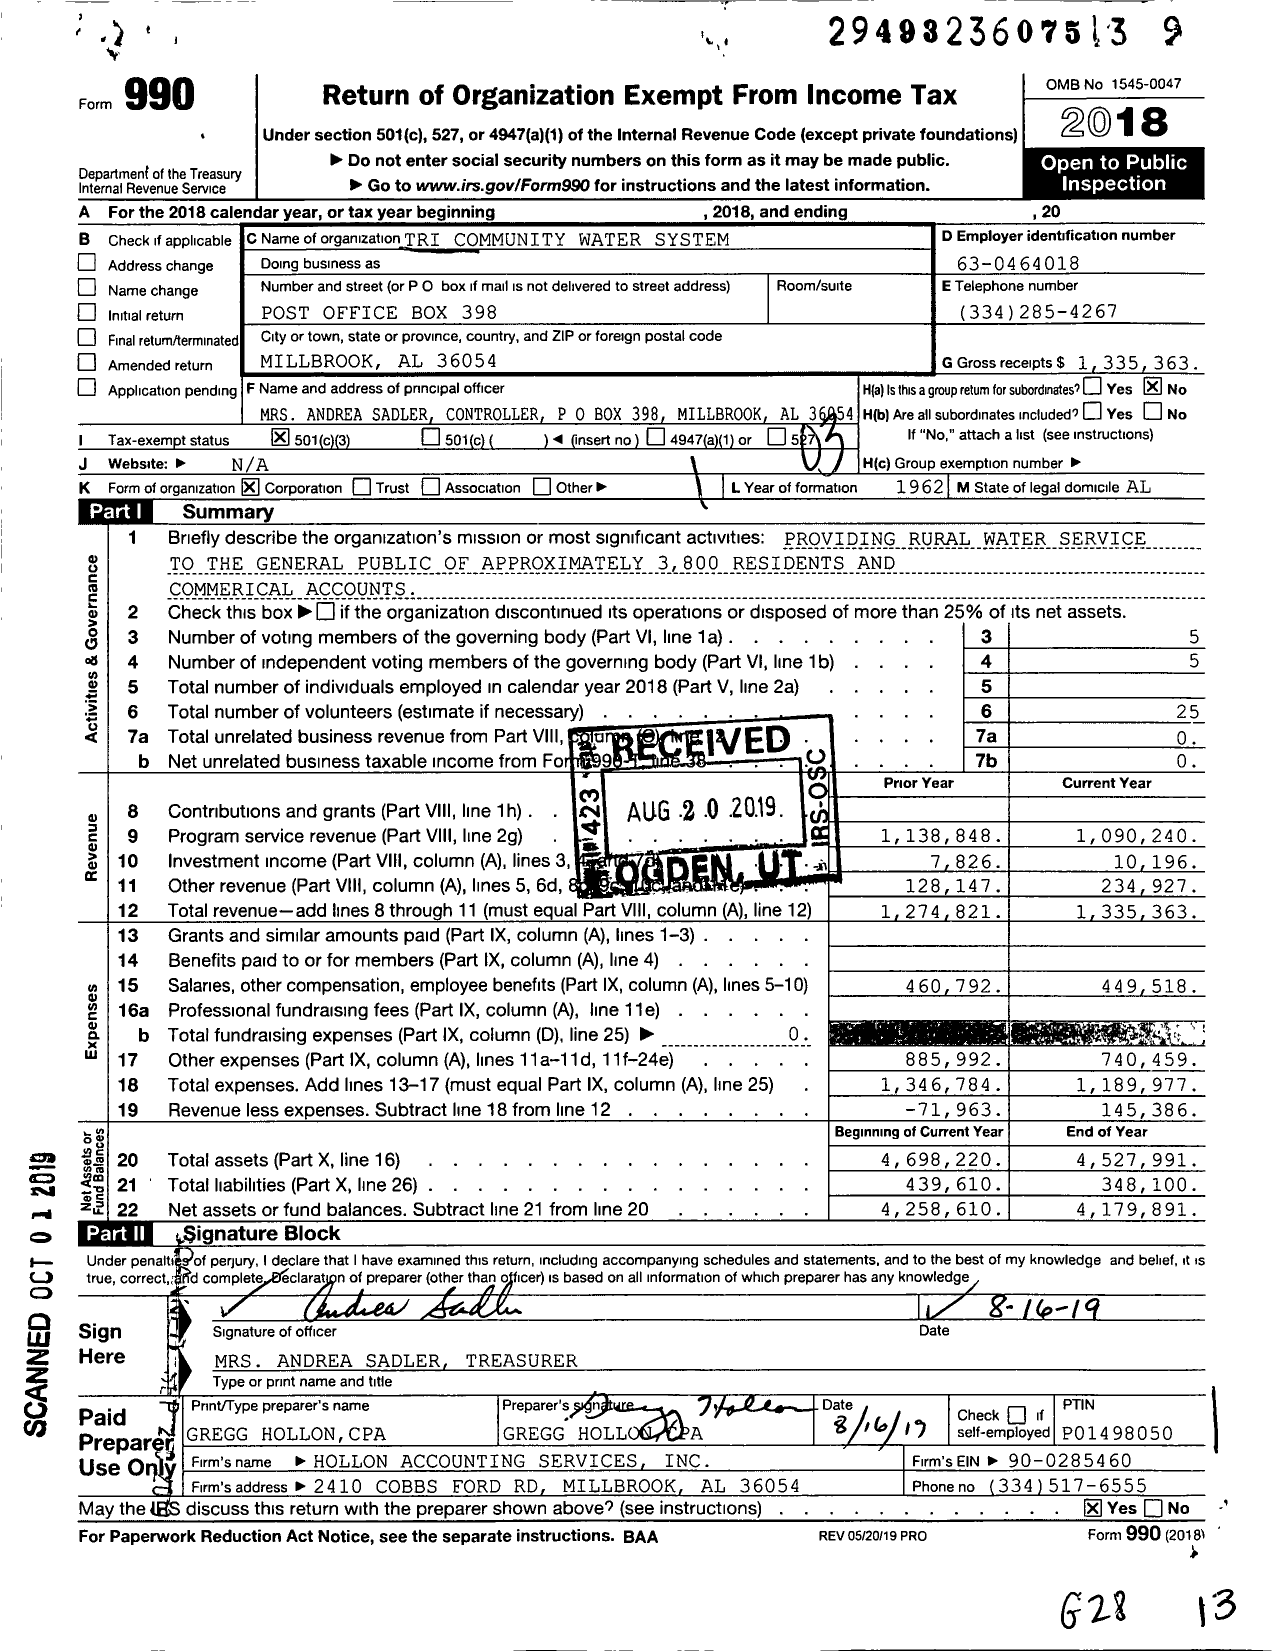 Image of first page of 2018 Form 990 for Tri Community Water System